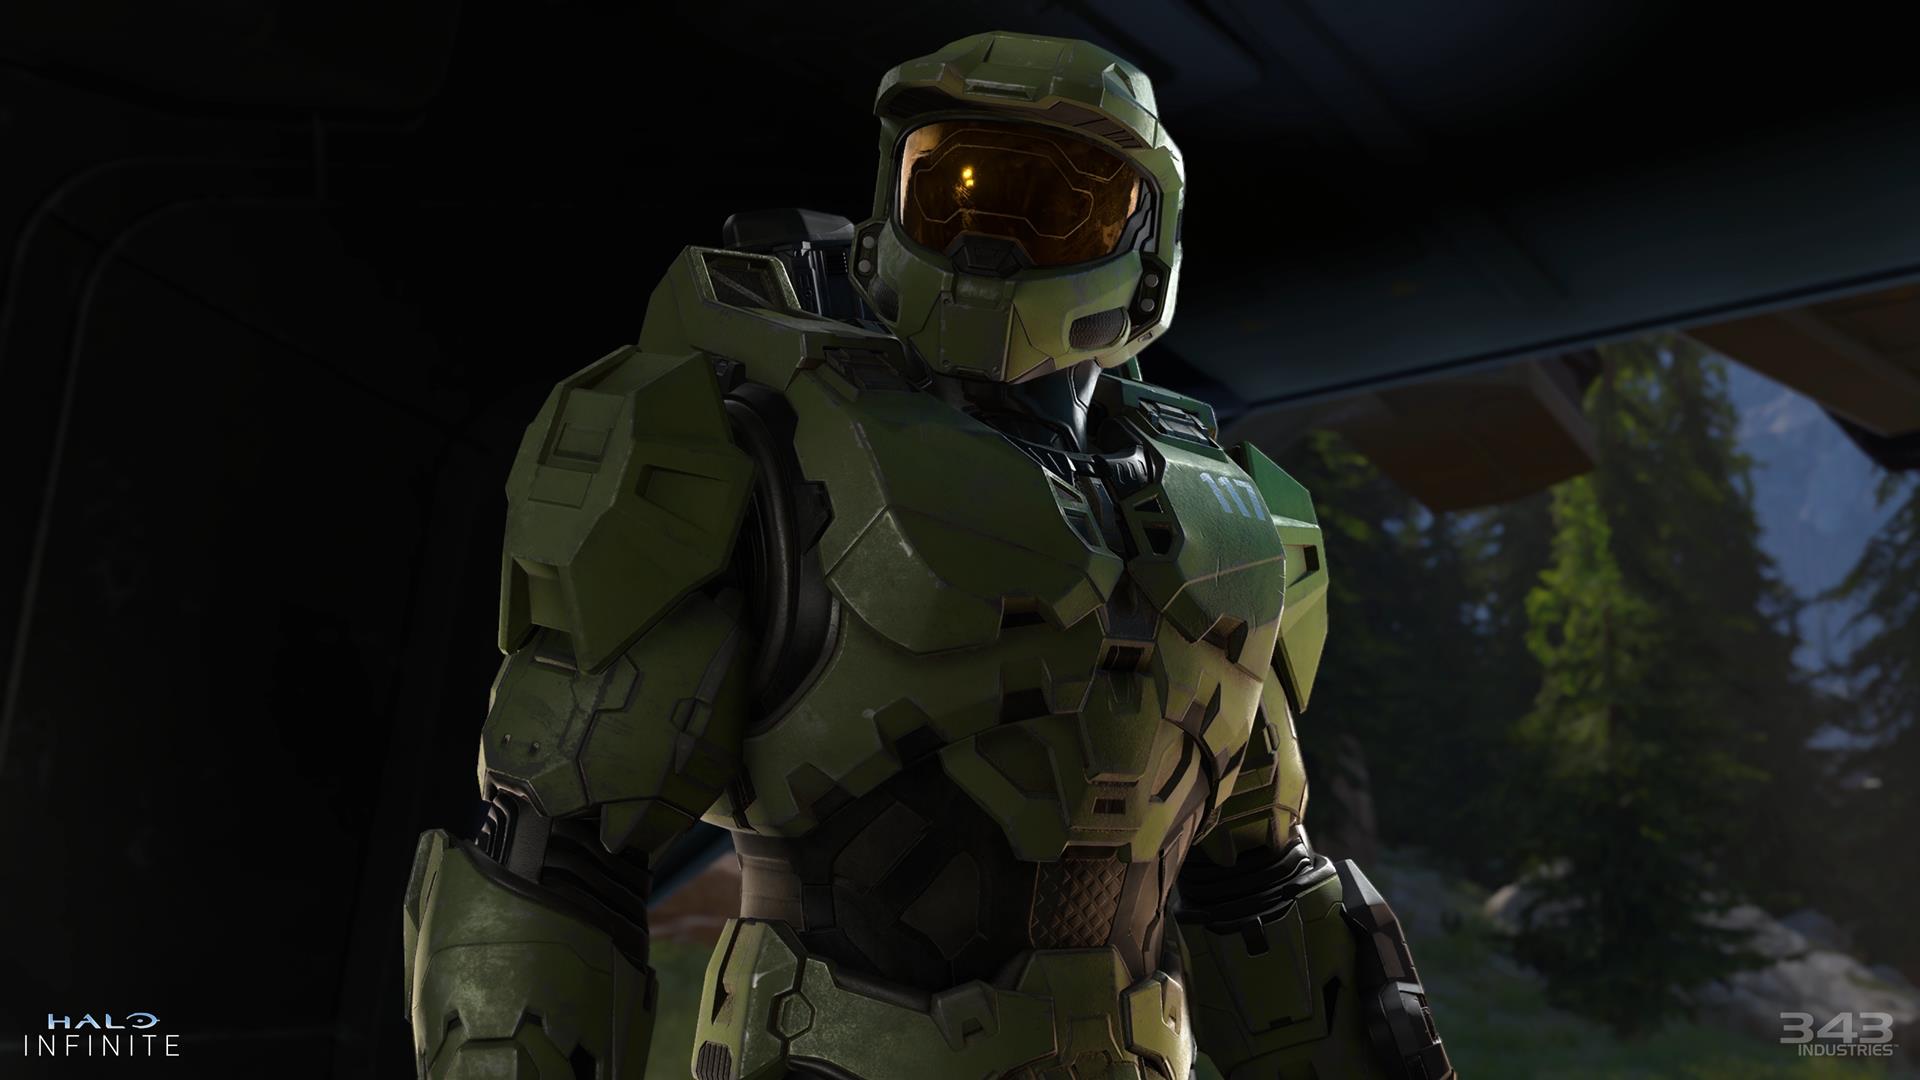 Image for Halo Infinite Battle Royale rumours are unfounded, says 343